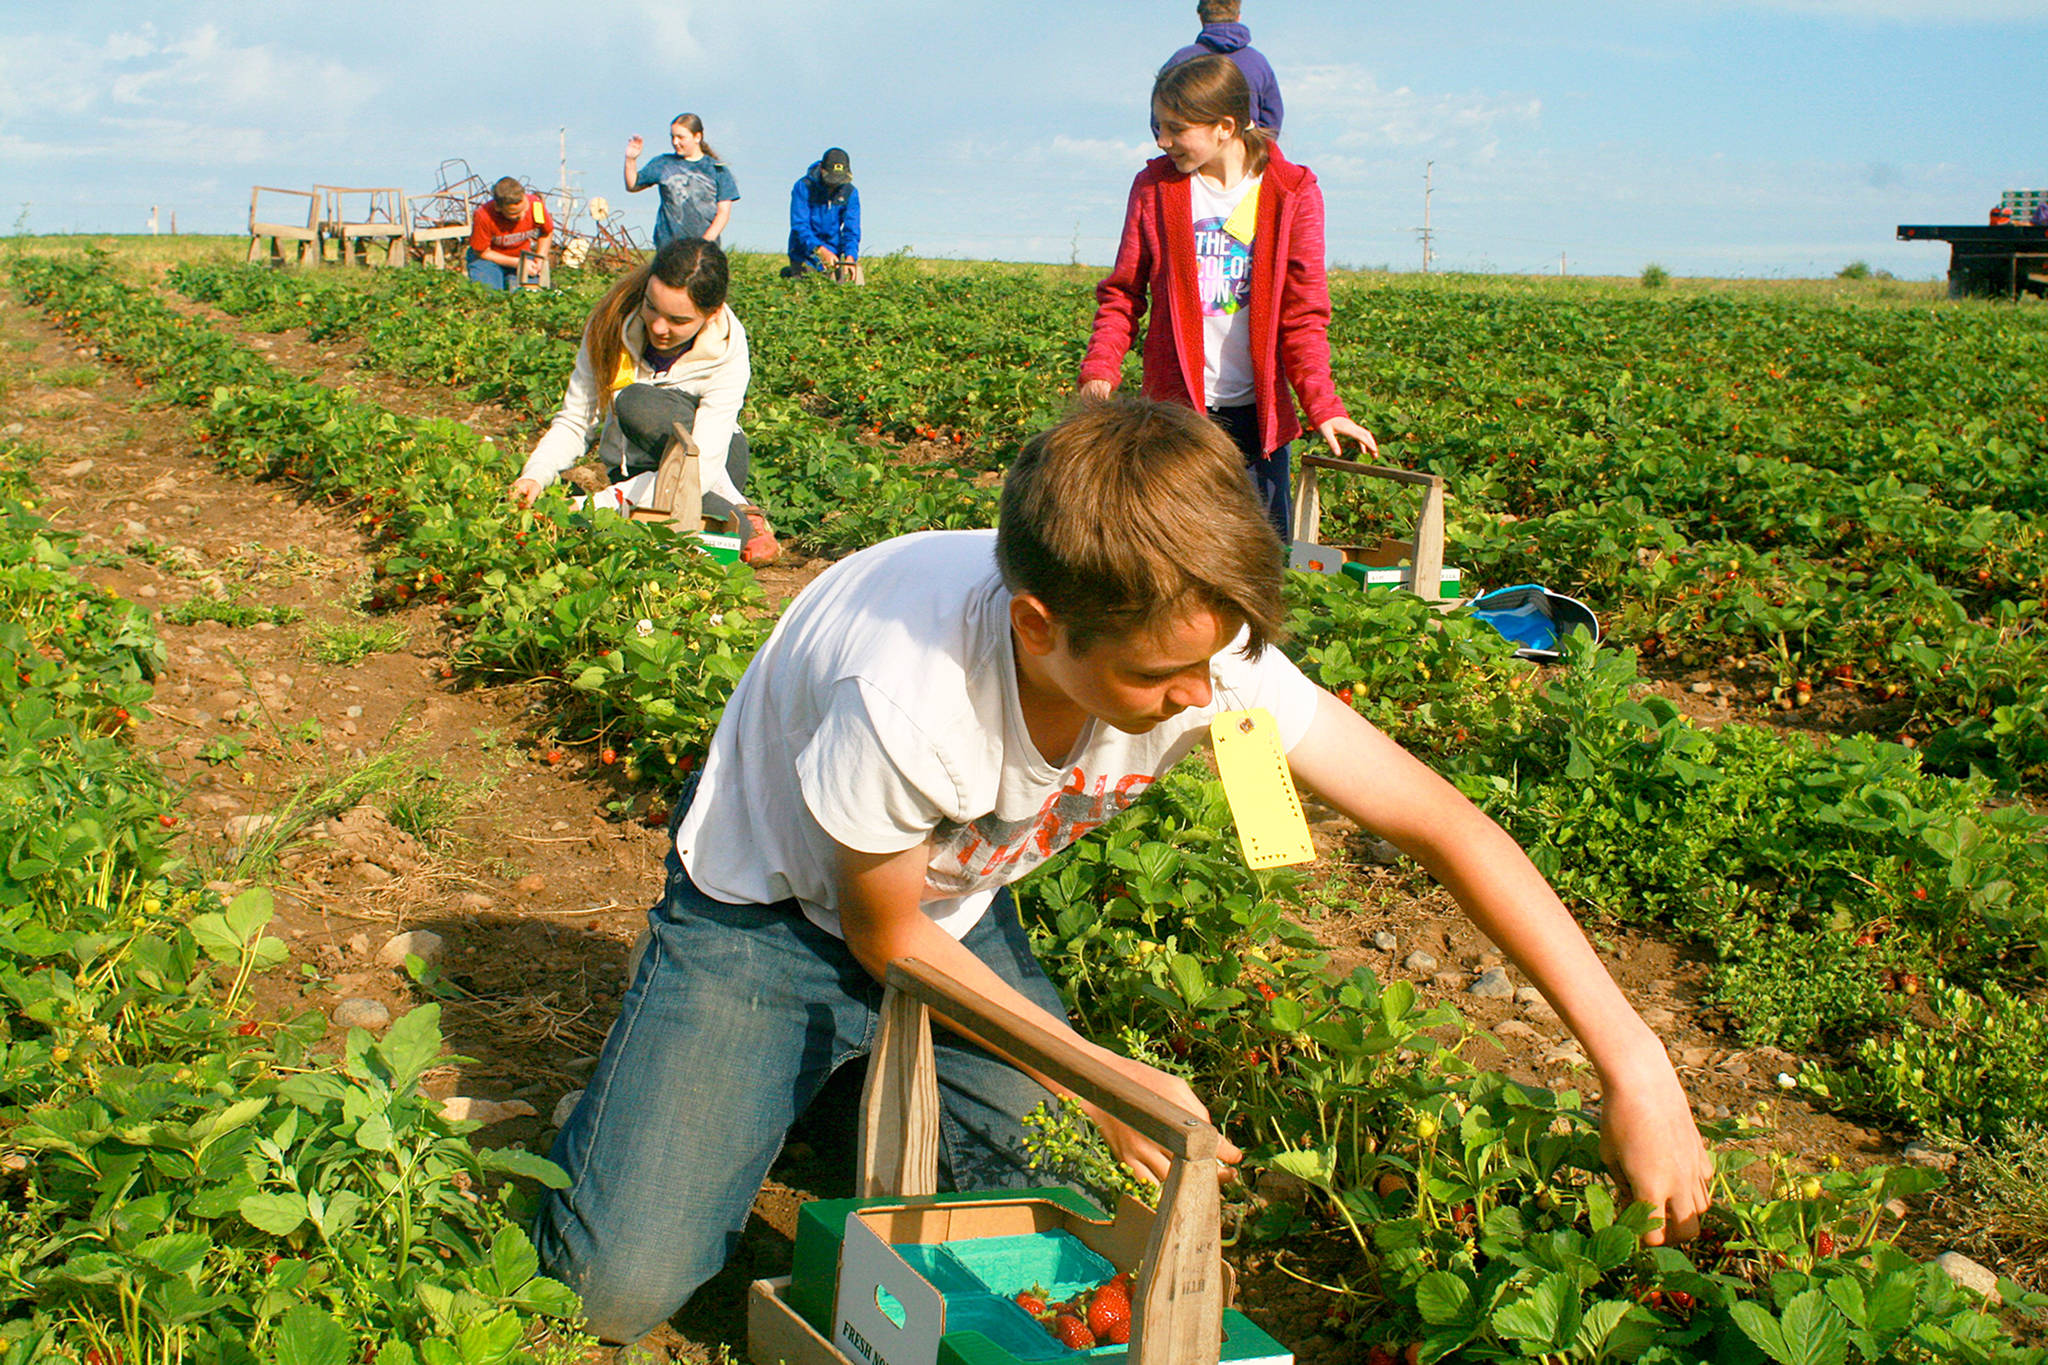 Daniel Welch, 13, reaches over a row of strawberries Monday to pick the big, juicy ones as part of his summer job at Bell’s Farm in Coupeville. The farm is hosting it’s inaugural Strawberry Daze community event from 10 a.m. to 4 p.m. Saturday, July 1 at Bell’s Farm, 892 N. West Beach Road. Photo by Daniel Warn/Whidbey News-Times